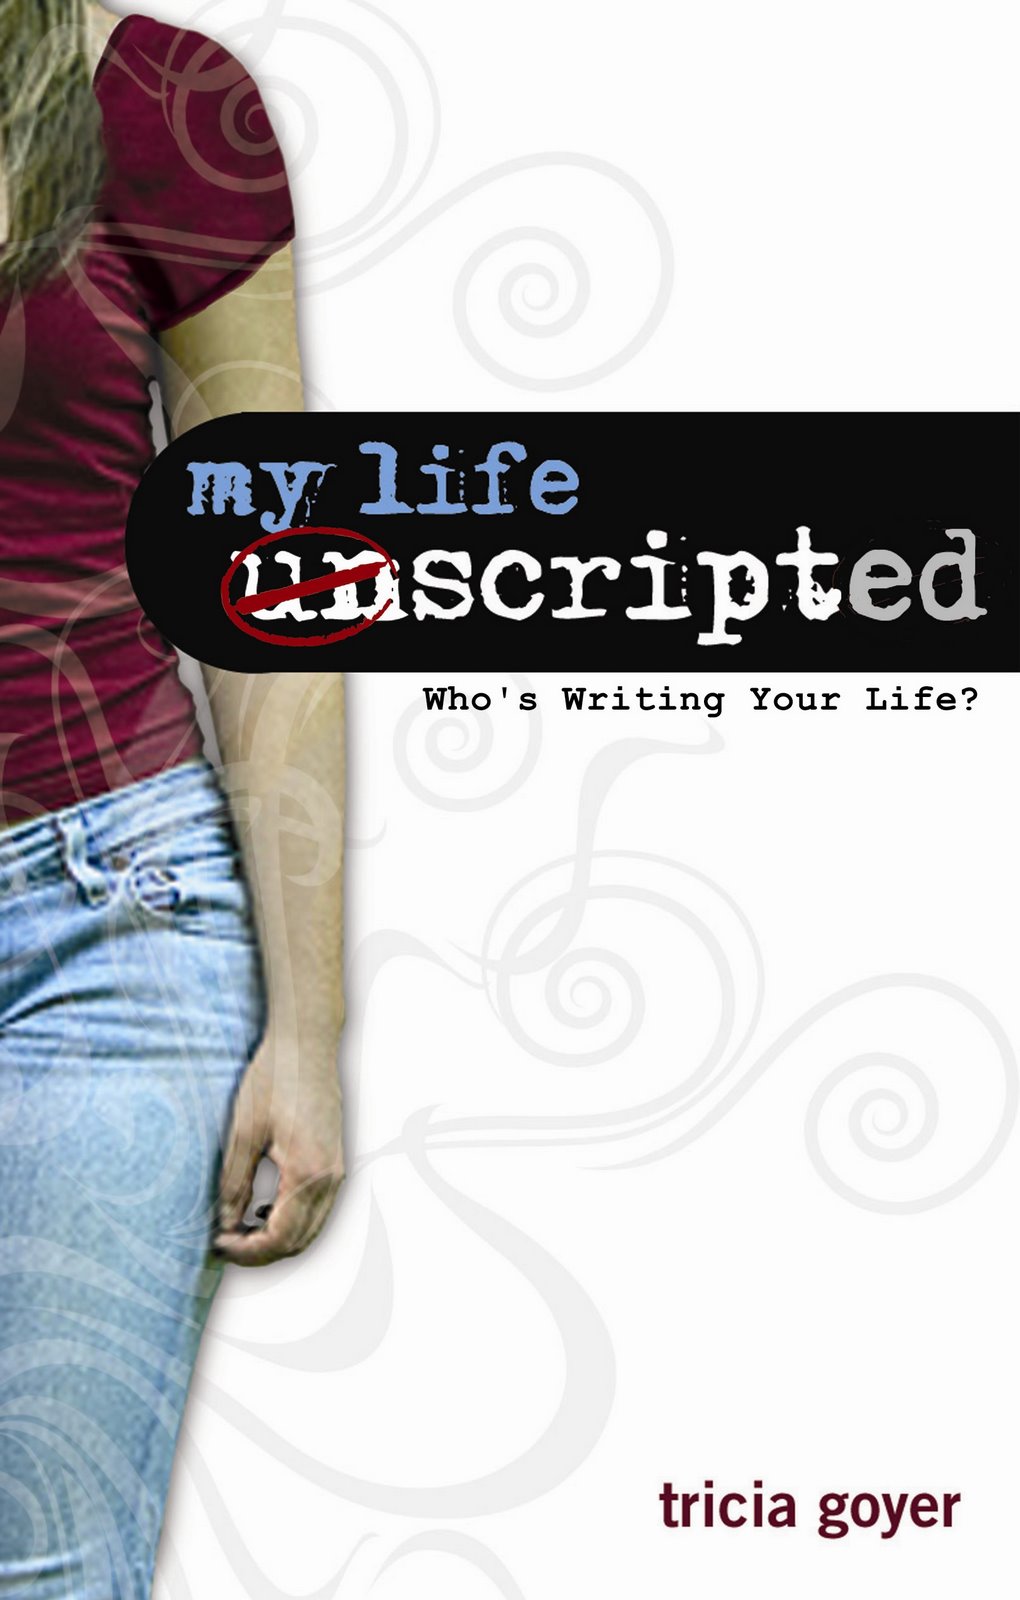 [my+life+unscripted.JPG]